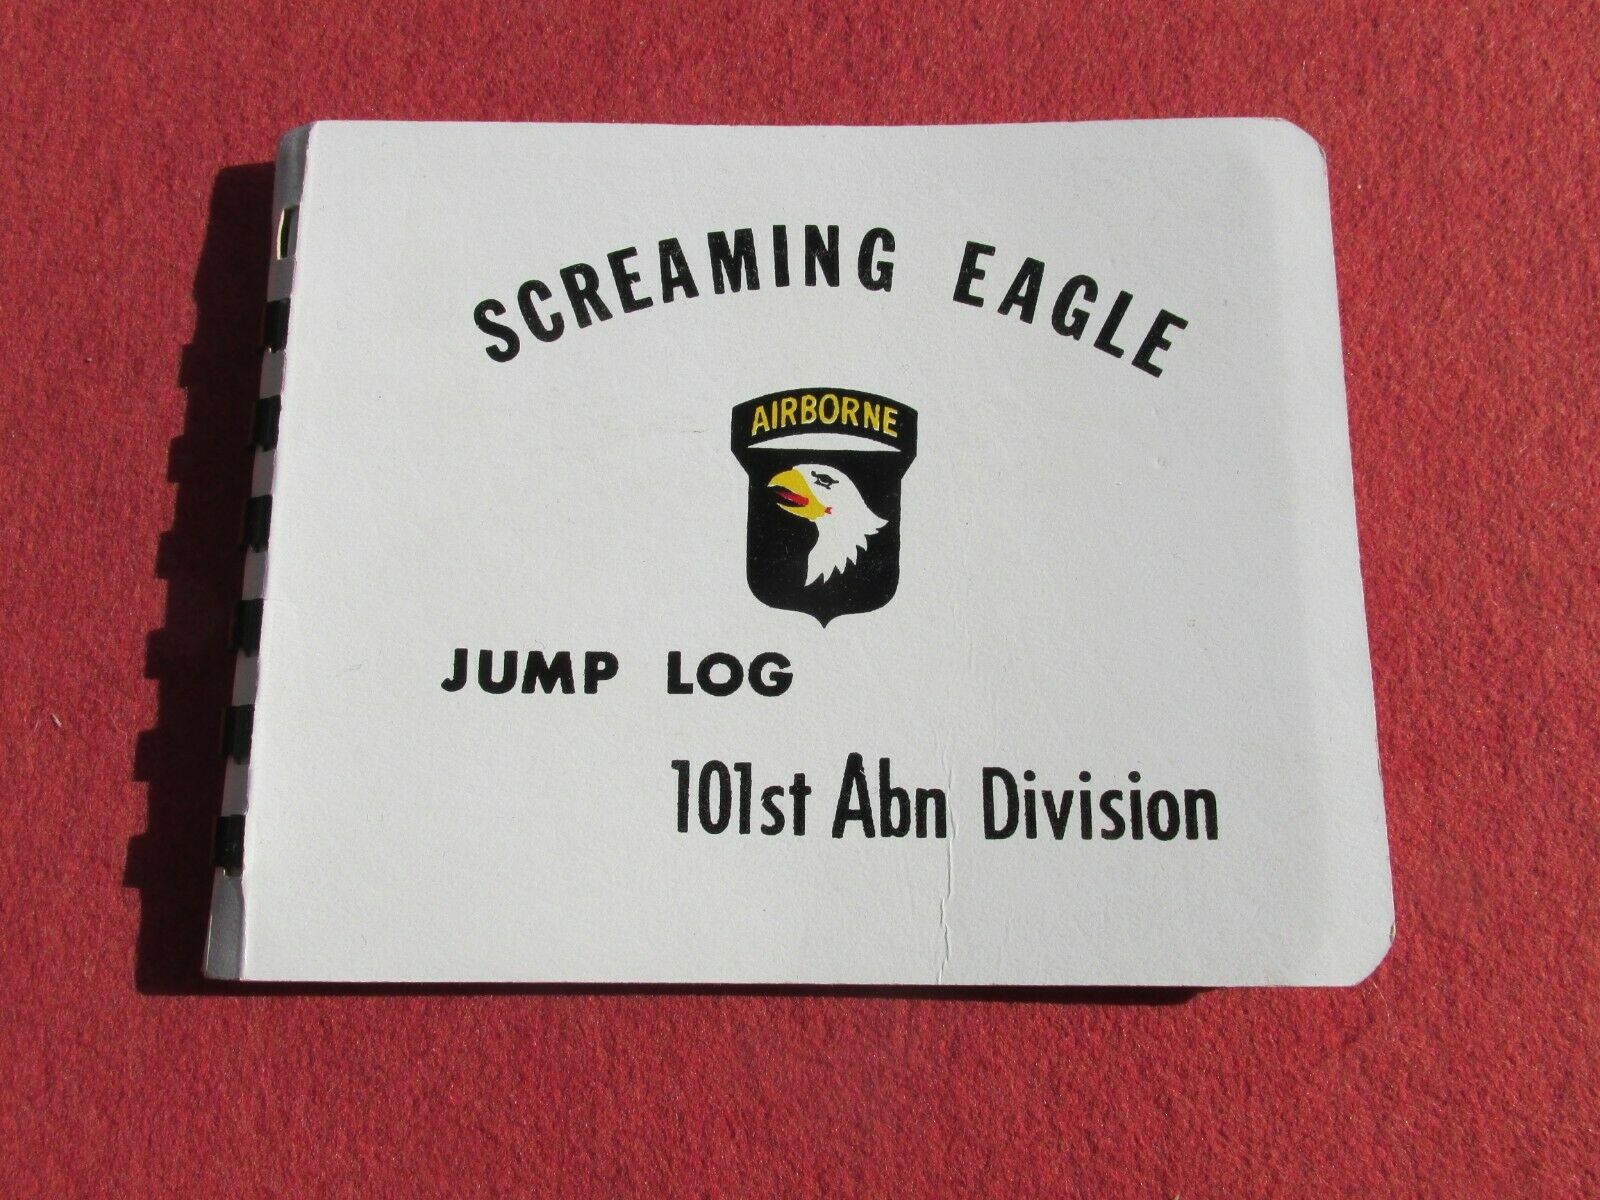 Us Army Military 101st Airborne Screaming Eagle Jump Log Book Master Wings